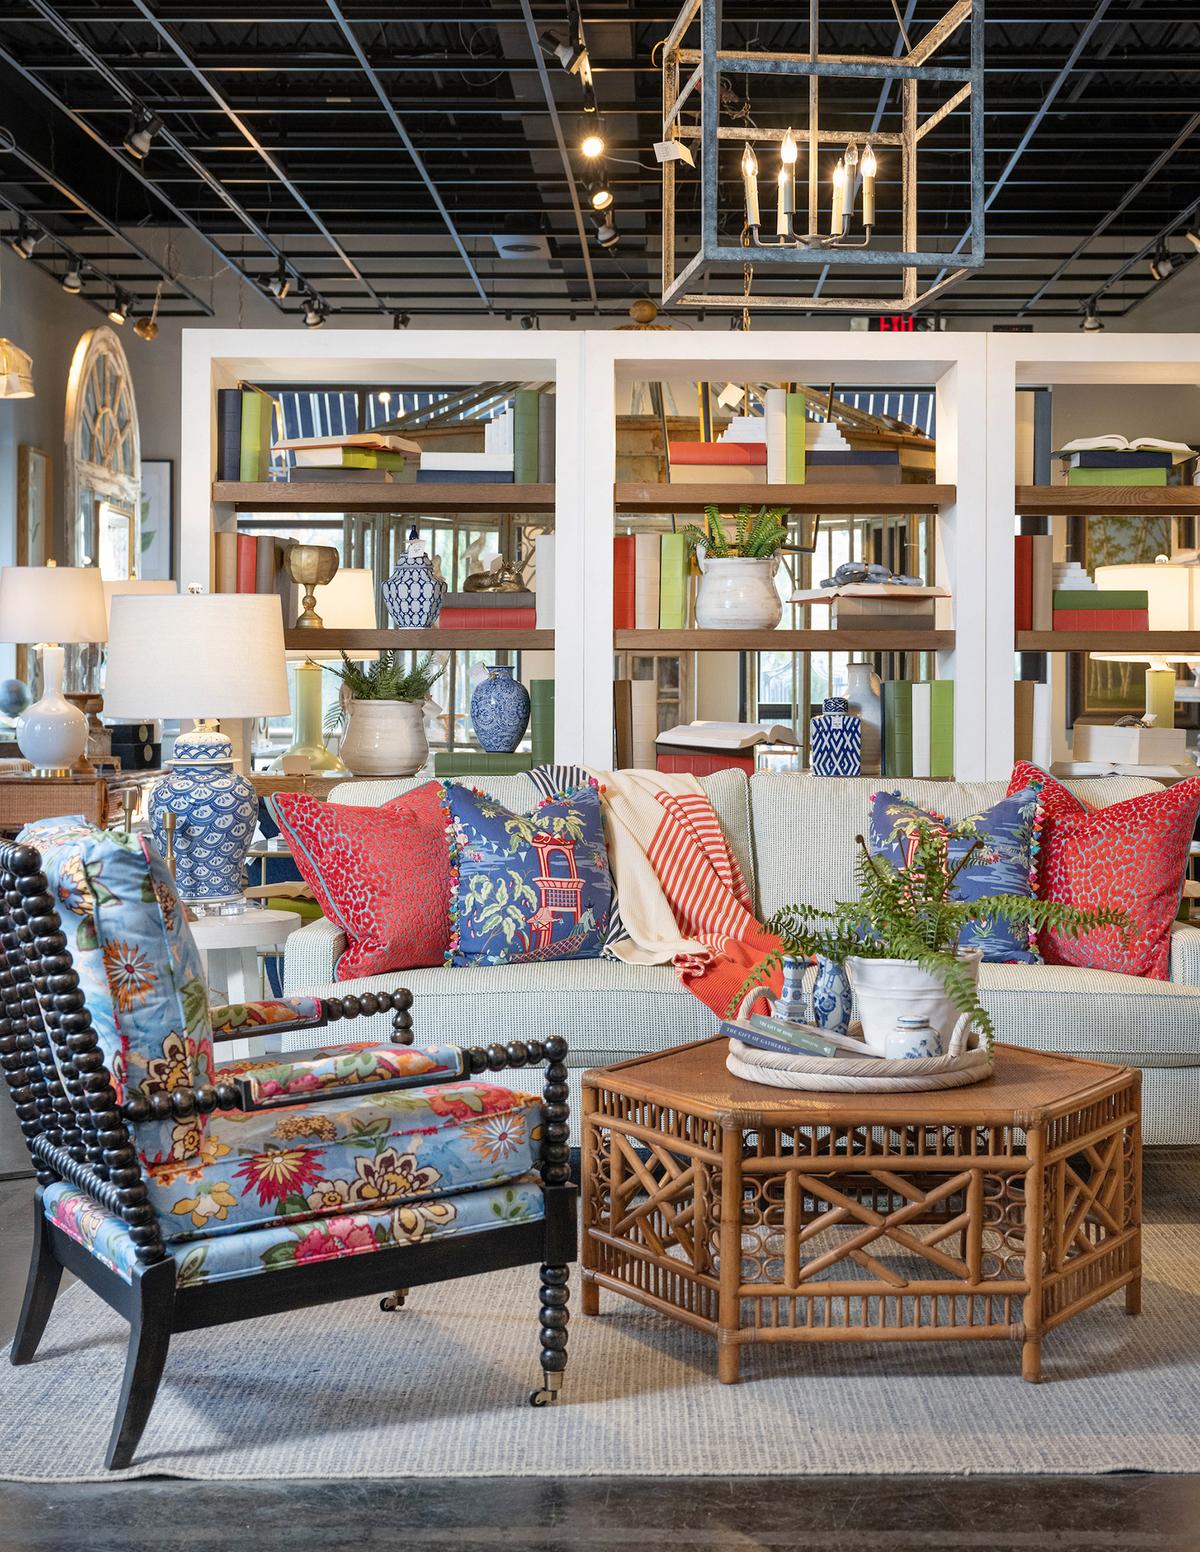 This living room is bursting with color, from the red and blue textiles to the multi-toned wood. (Handout/TNS)